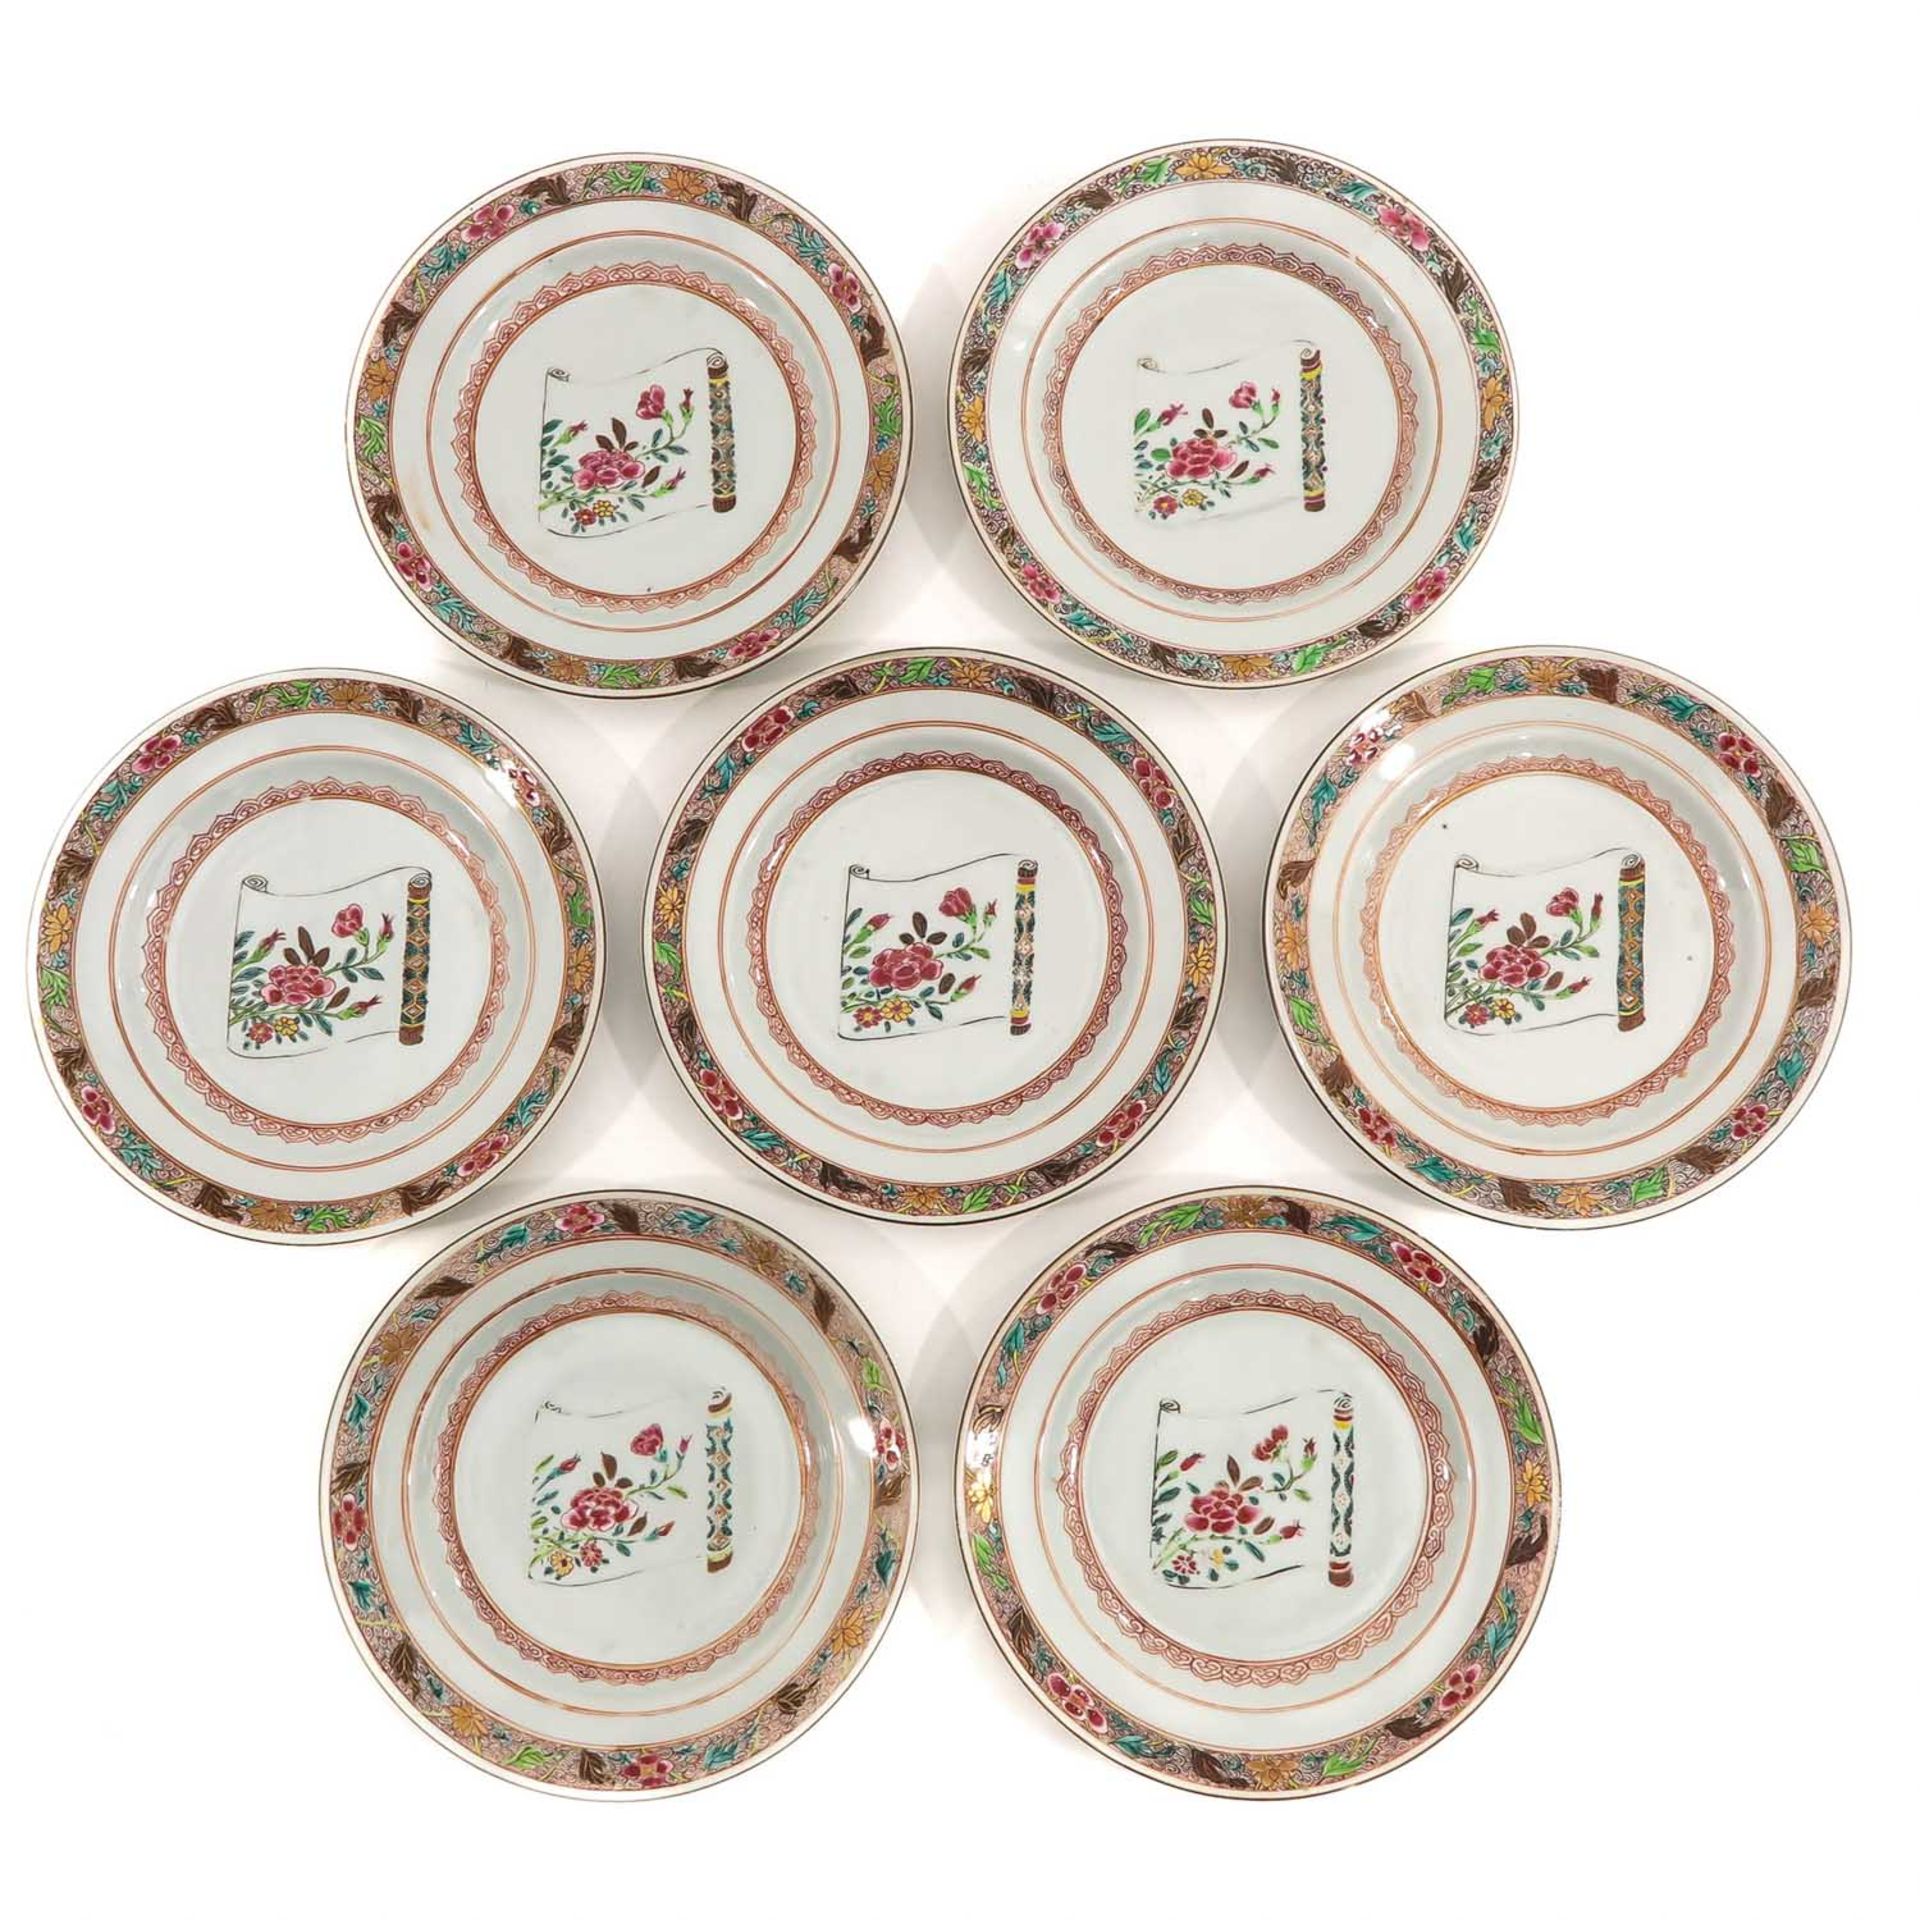 A Series of 7 Famille Rose Plates